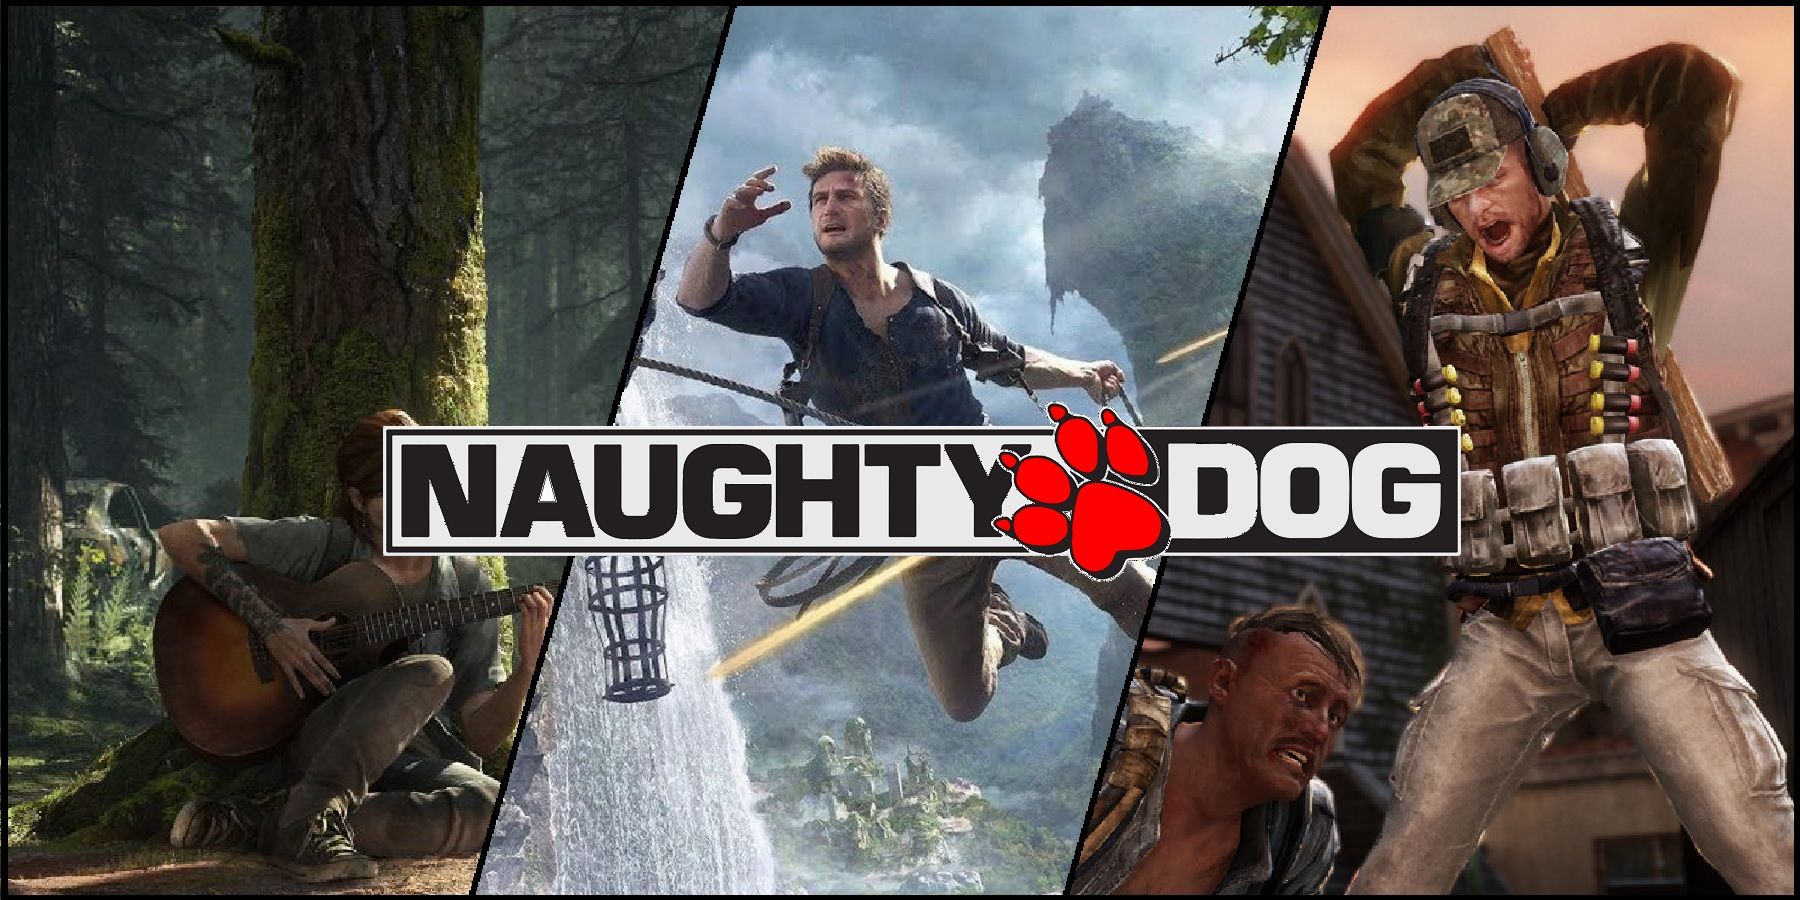 Naughty Dog Jobs on X: Naughty Dog is hiring across multiple disciplines  for the studio's first standalone multiplayer game! Visit   to learn more!  / X